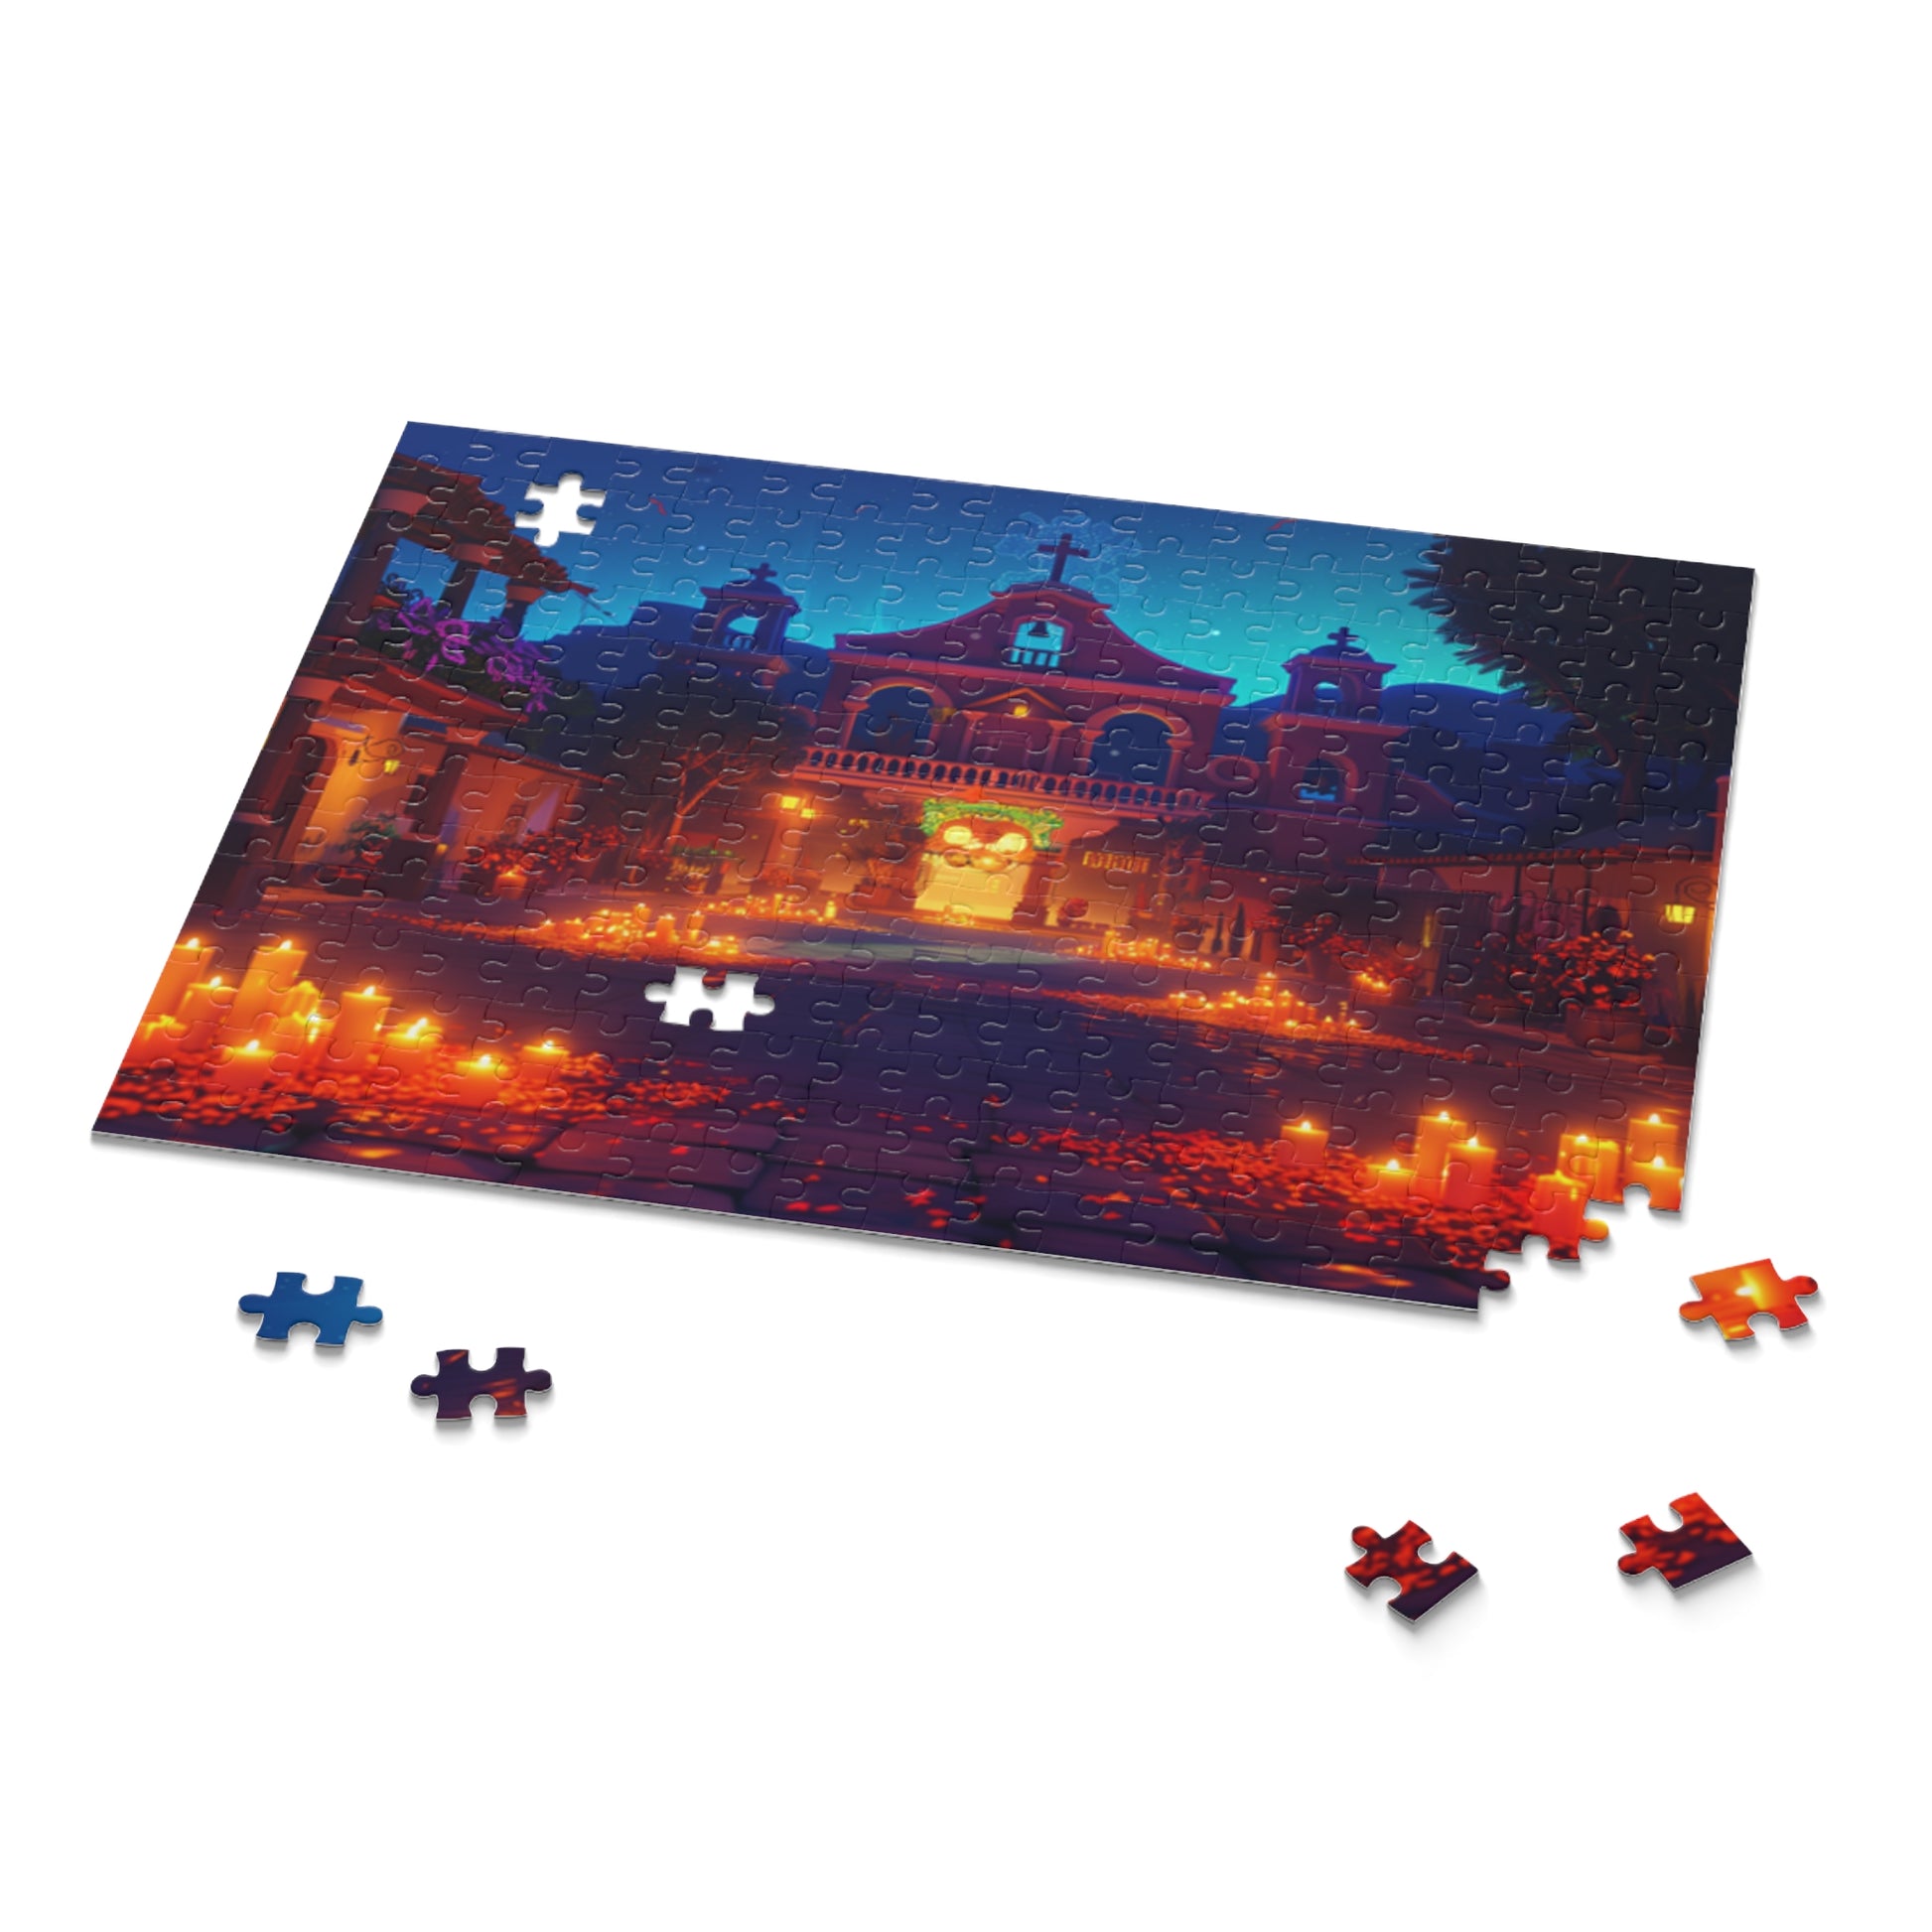 Mexican Art Church Candle Night Retro Jigsaw Puzzle Adult Birthday Business Jigsaw Puzzle Gift for Him Funny Humorous Indoor Outdoor Game Gift For Her Online-9